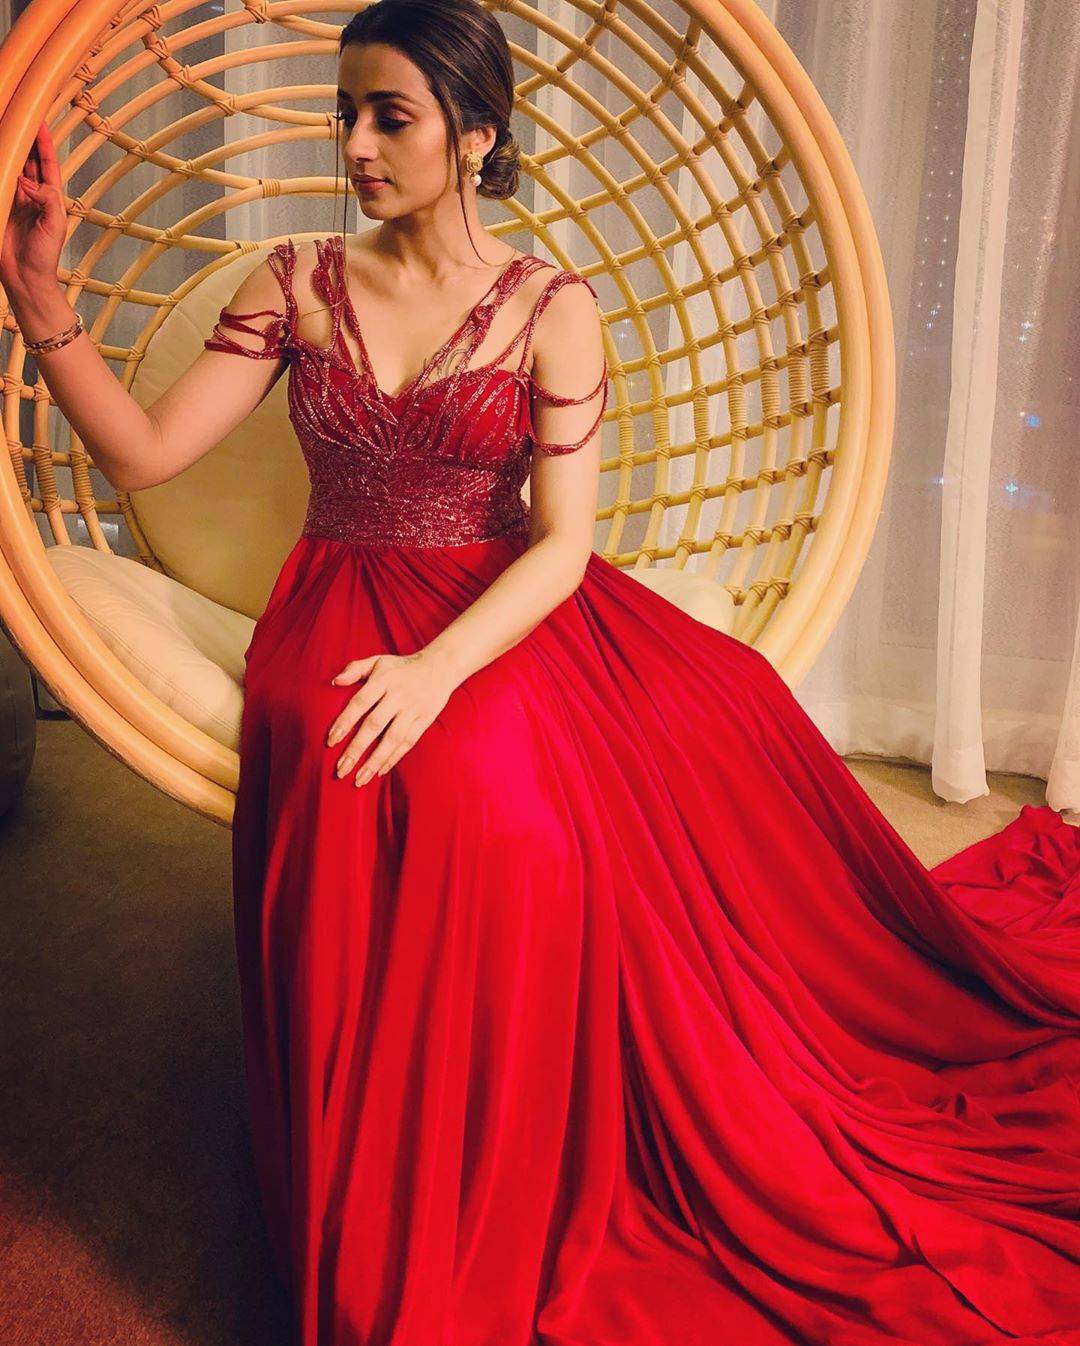 Our very own Trisha Krishnan attended the SIIMA awards 2019 in a red gown from designer Swapnil Shinde - Fashion Models